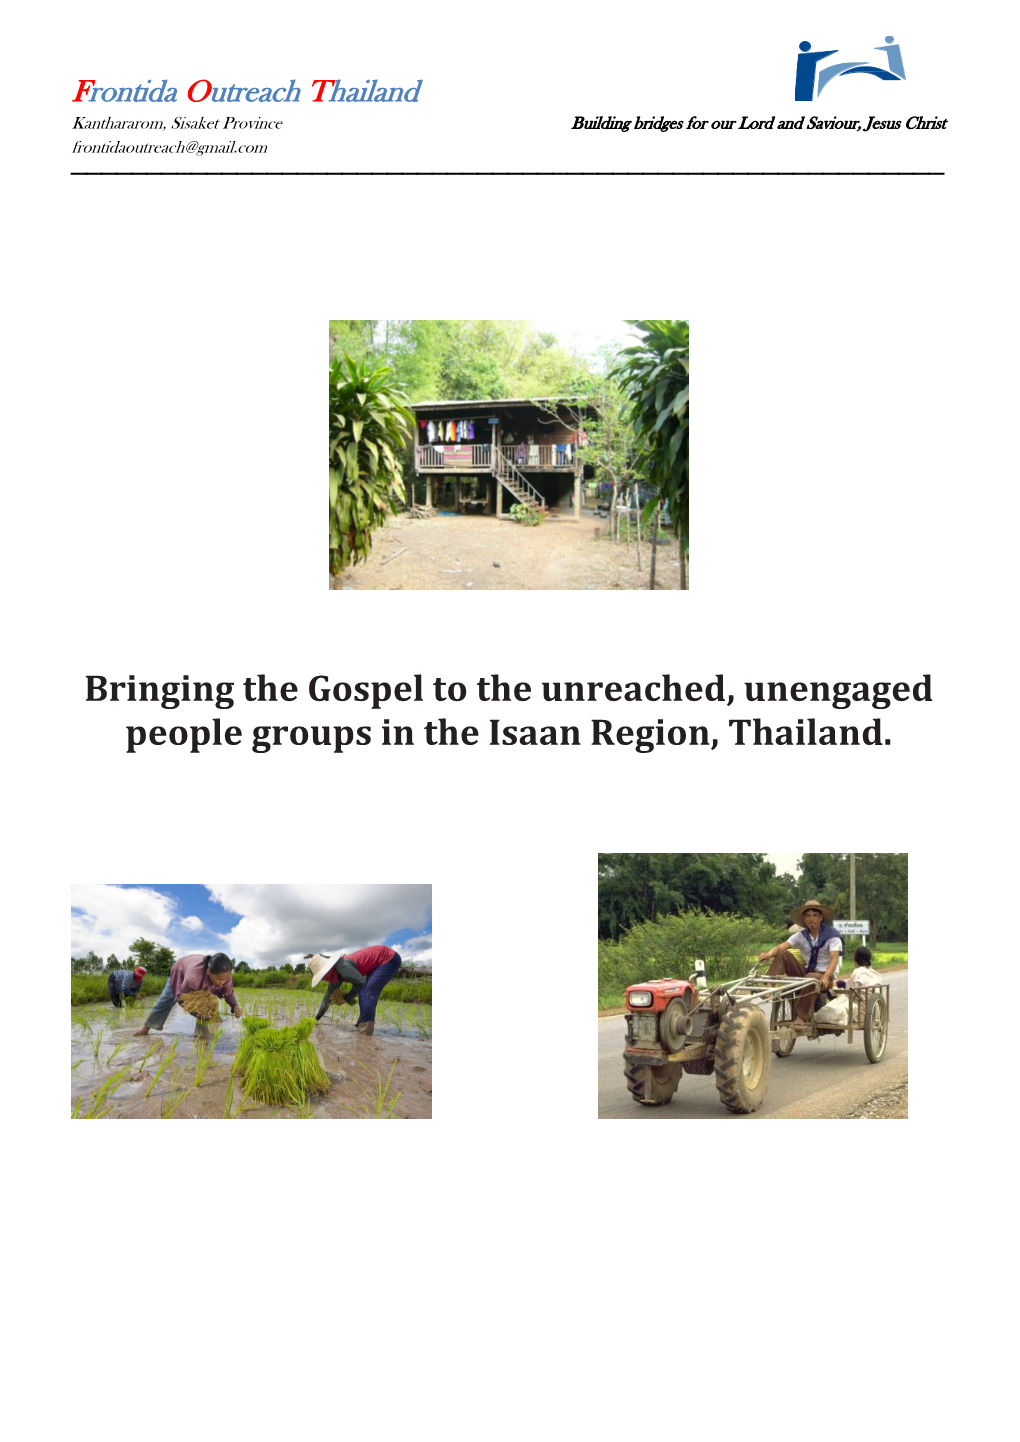 Bringing the Gospel to the Unreached, Unengaged People Groups in the Isaan Region, Thailand